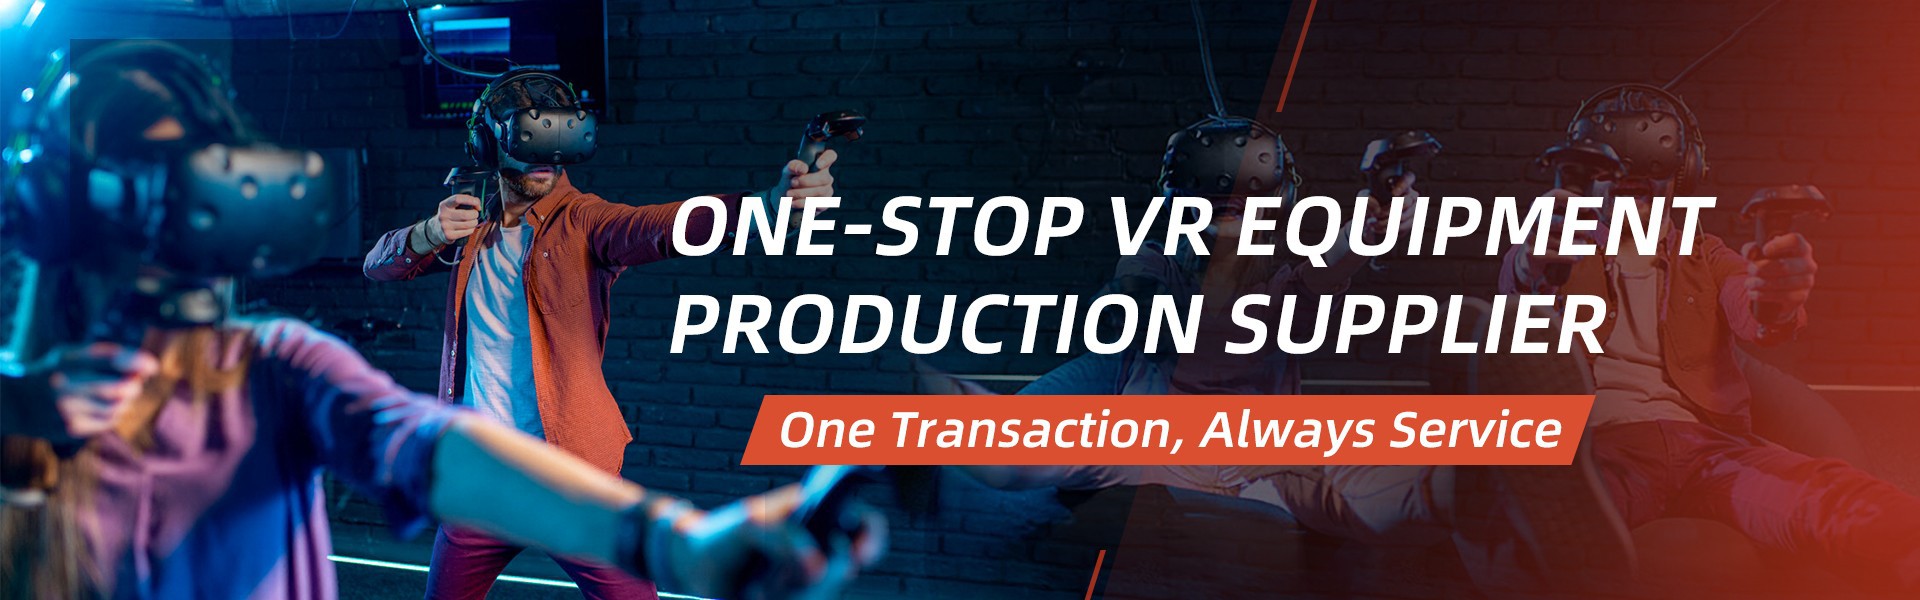 One-stop vr equipment product provider - Movie Power